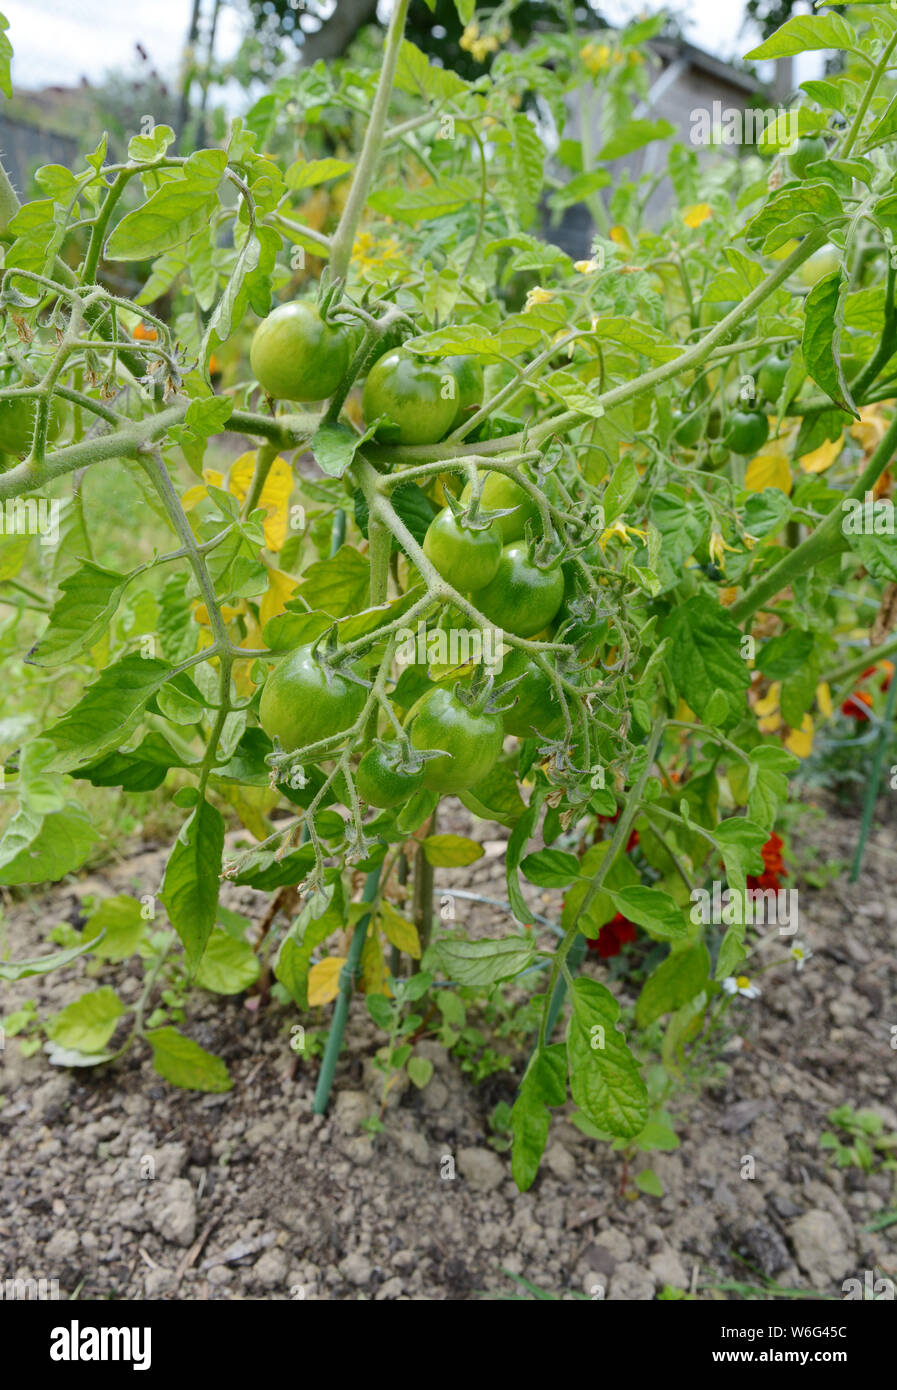 Red alert tomatoes grow on a tomato plant, the branch bending under the weight of the growing fruit Stock Photo